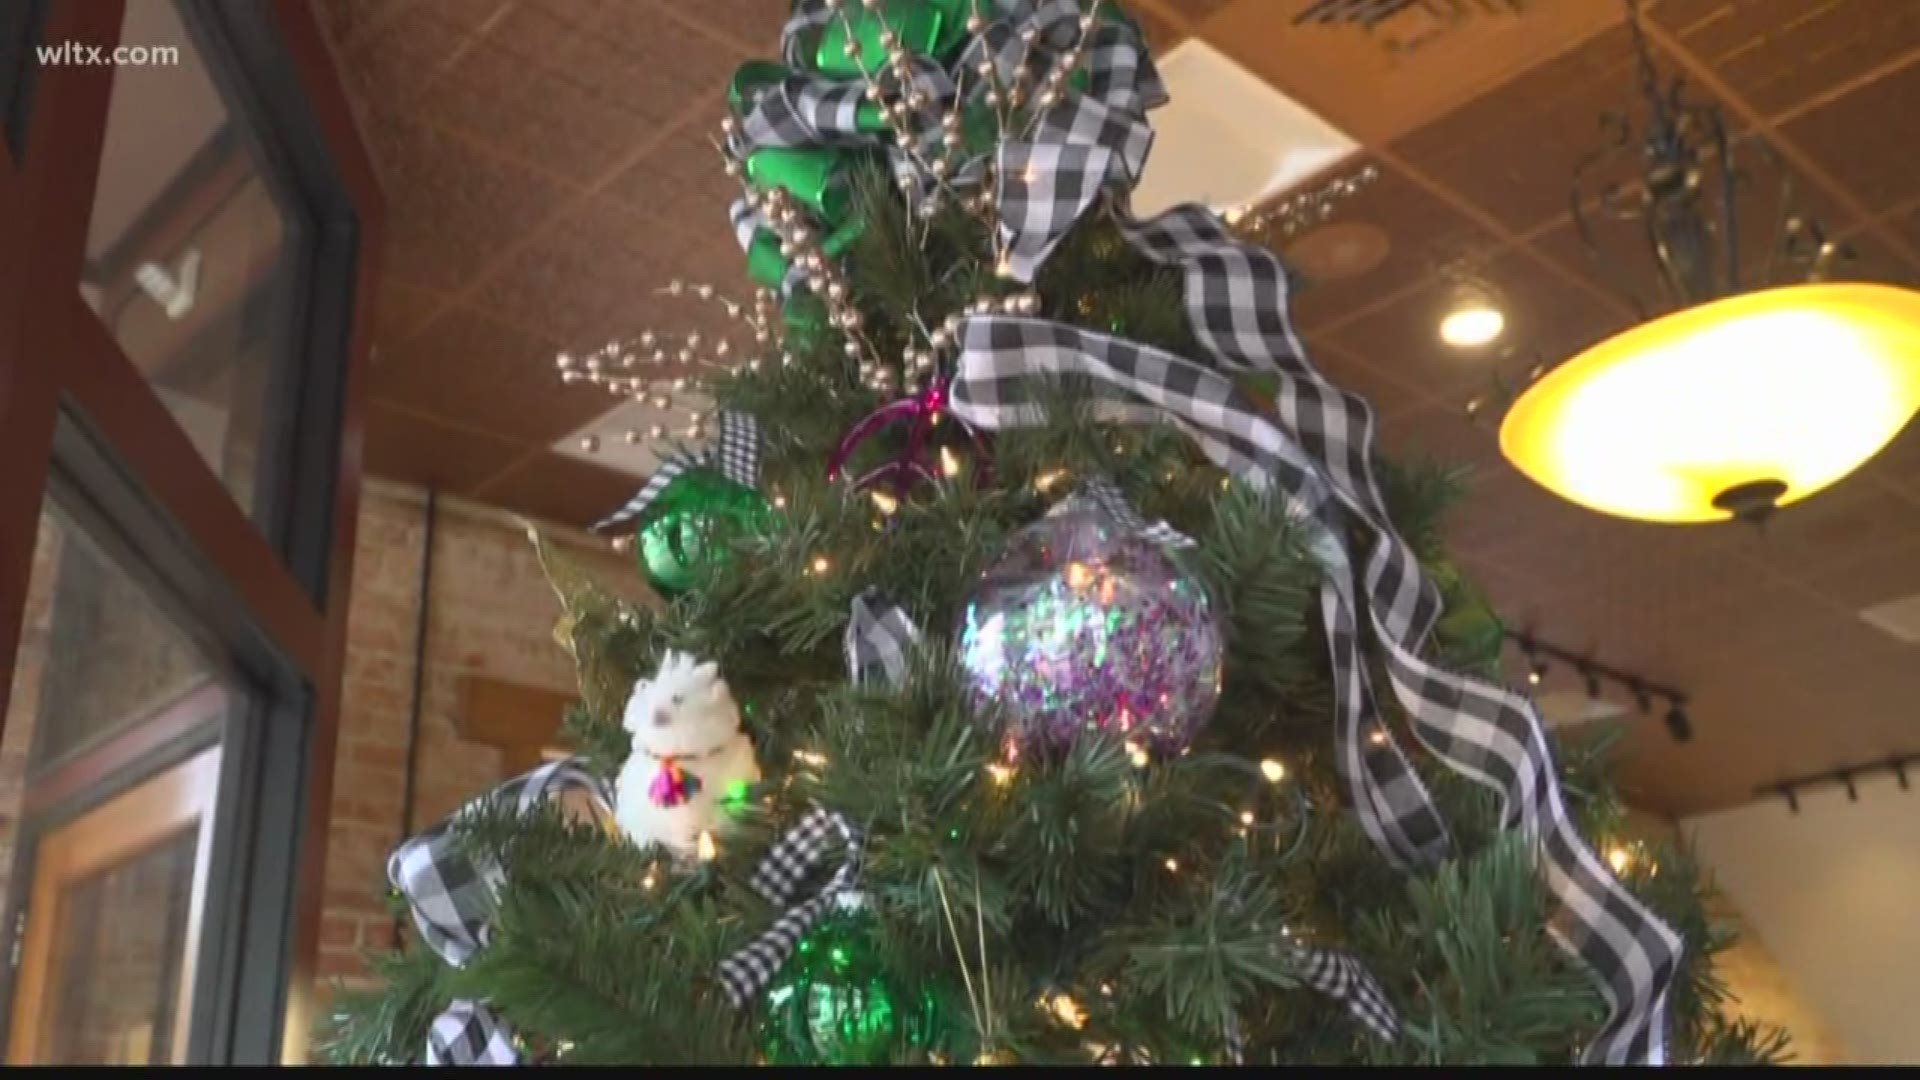 For the past 18 years the Tuomey Foundation has hosted the festival of trees with proceeds to help hospice care